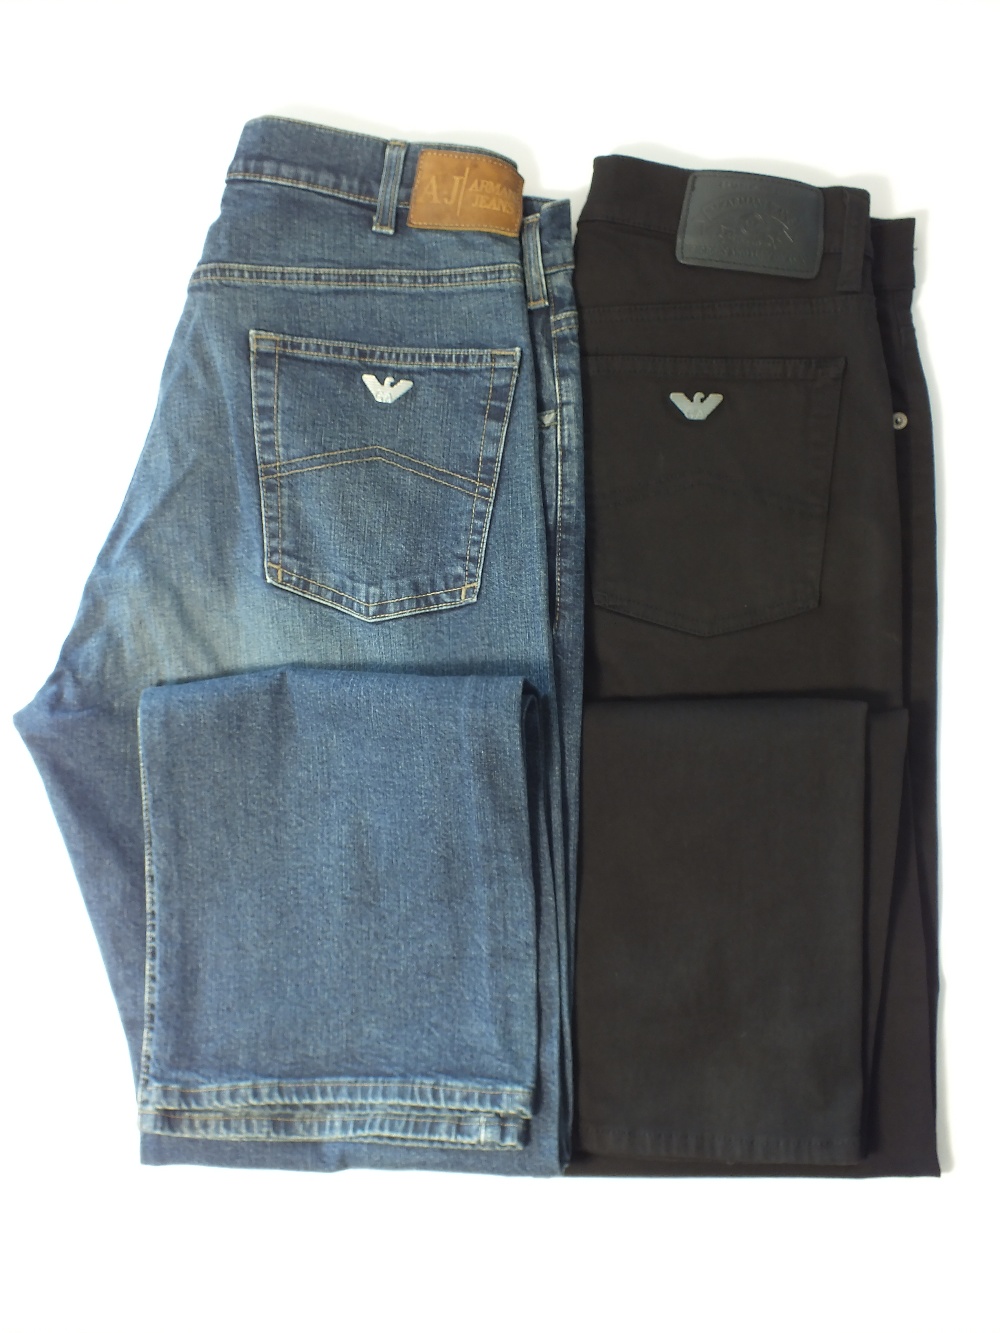 Two pairs of jeans, one blue, one black, Armani, one size 32, one size 34